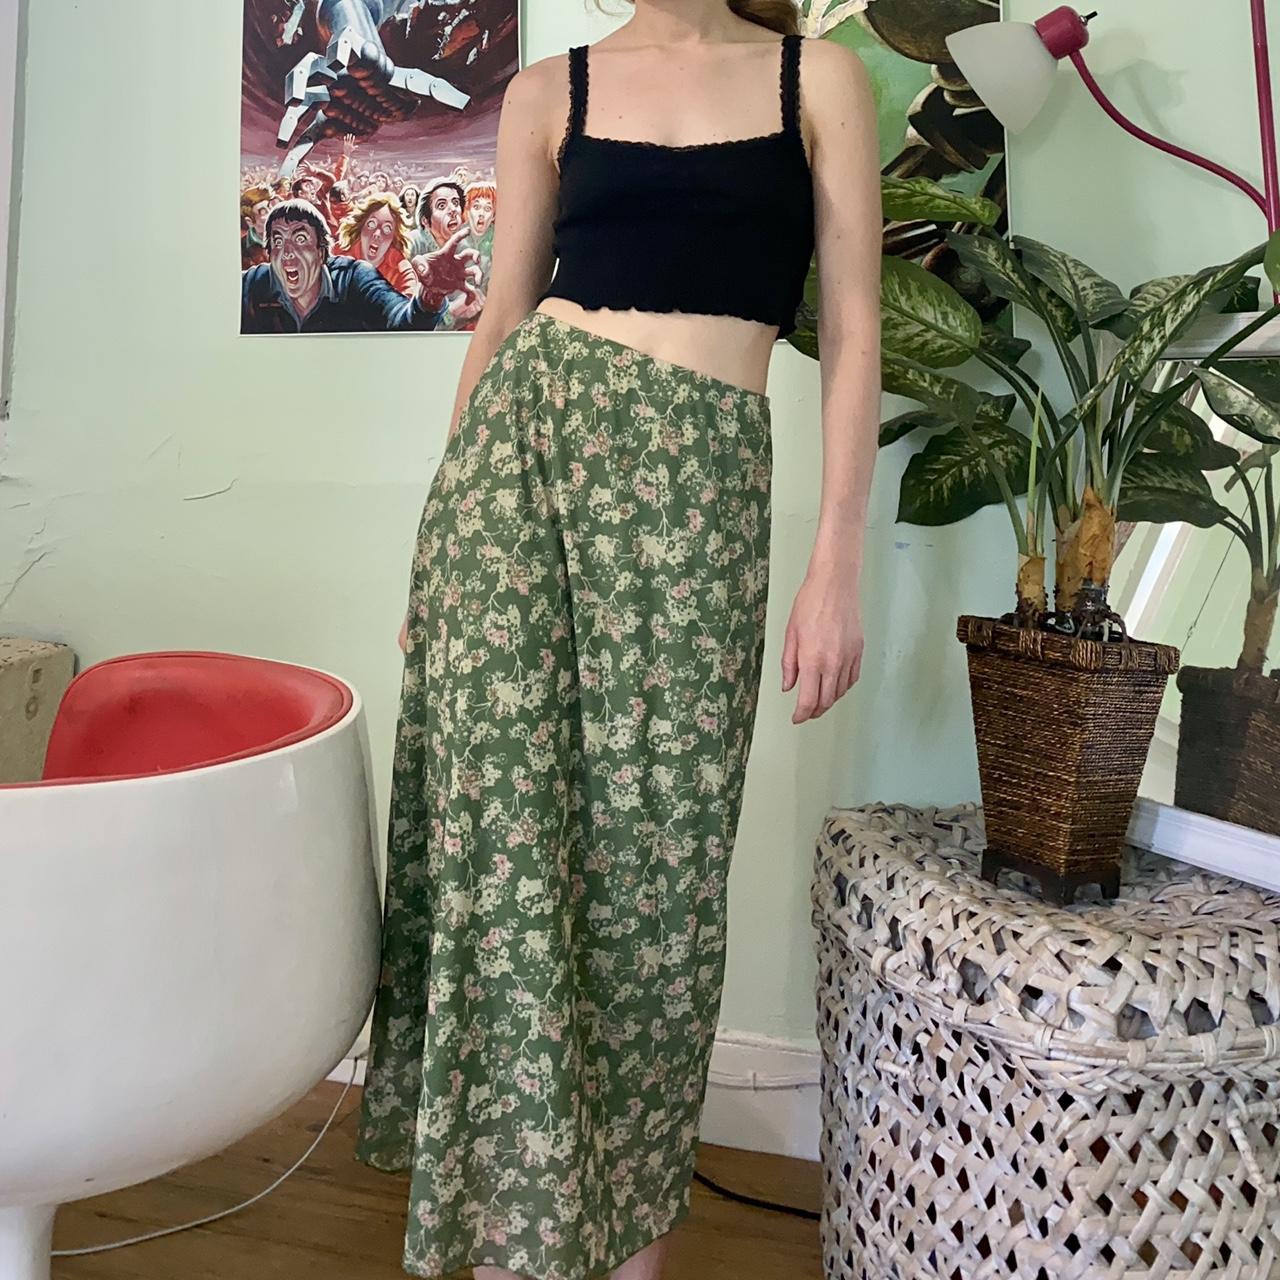 Product Image 2 - green floral maxi skirt

green maxi